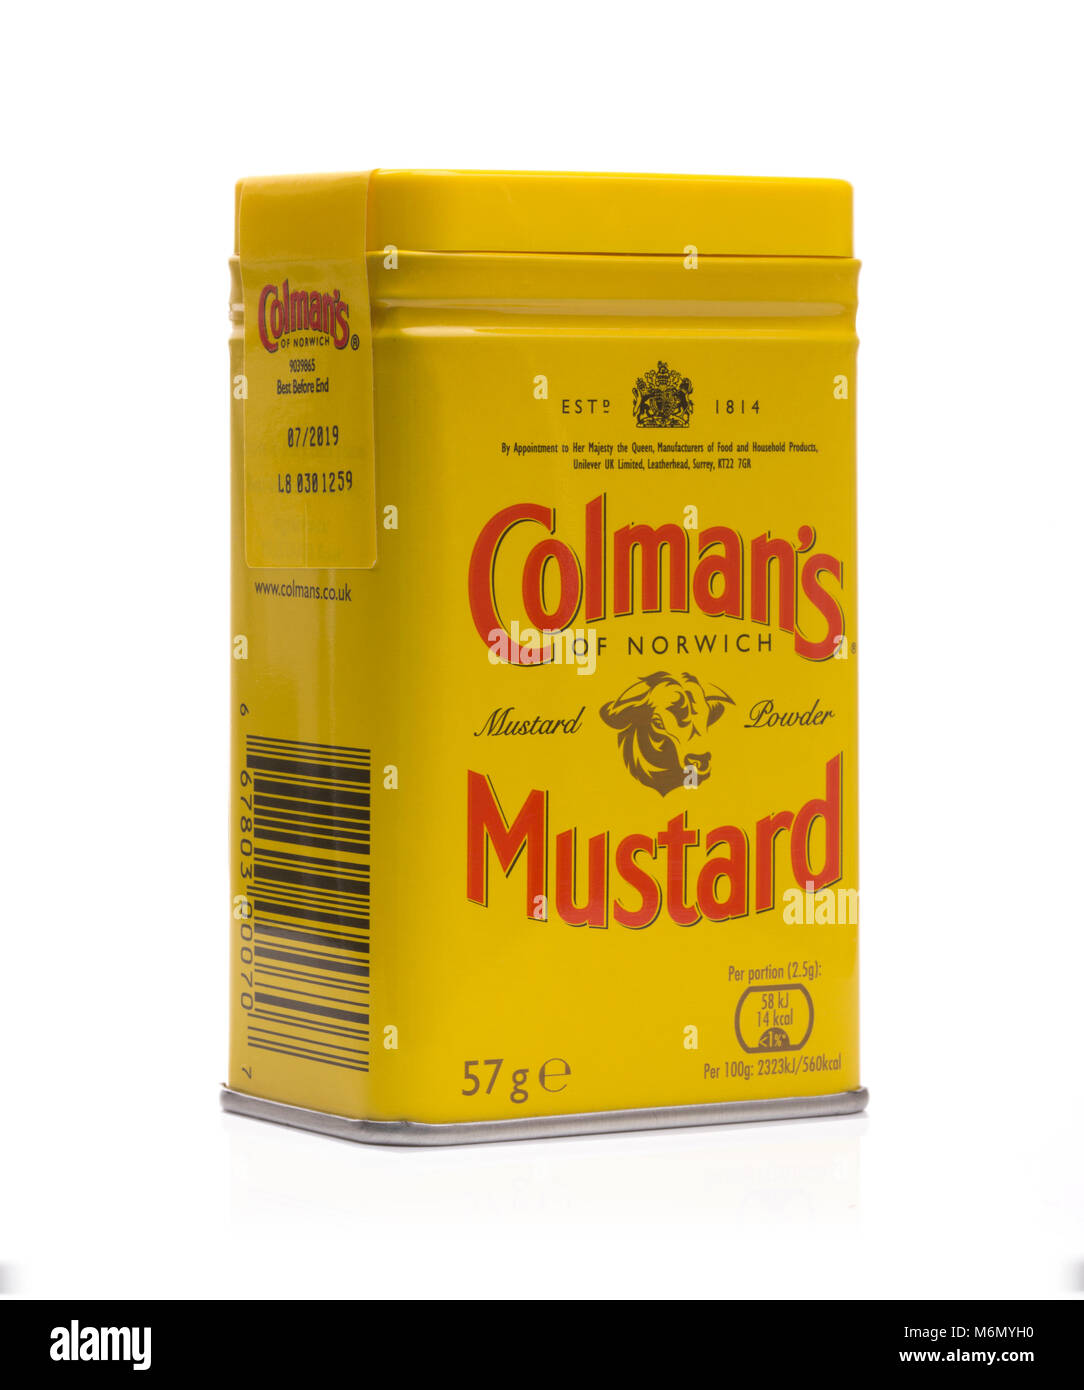 SWINDON, UK - MARCH 5, 2017: Tin of Colmans Mustard on a white background Stock Photo